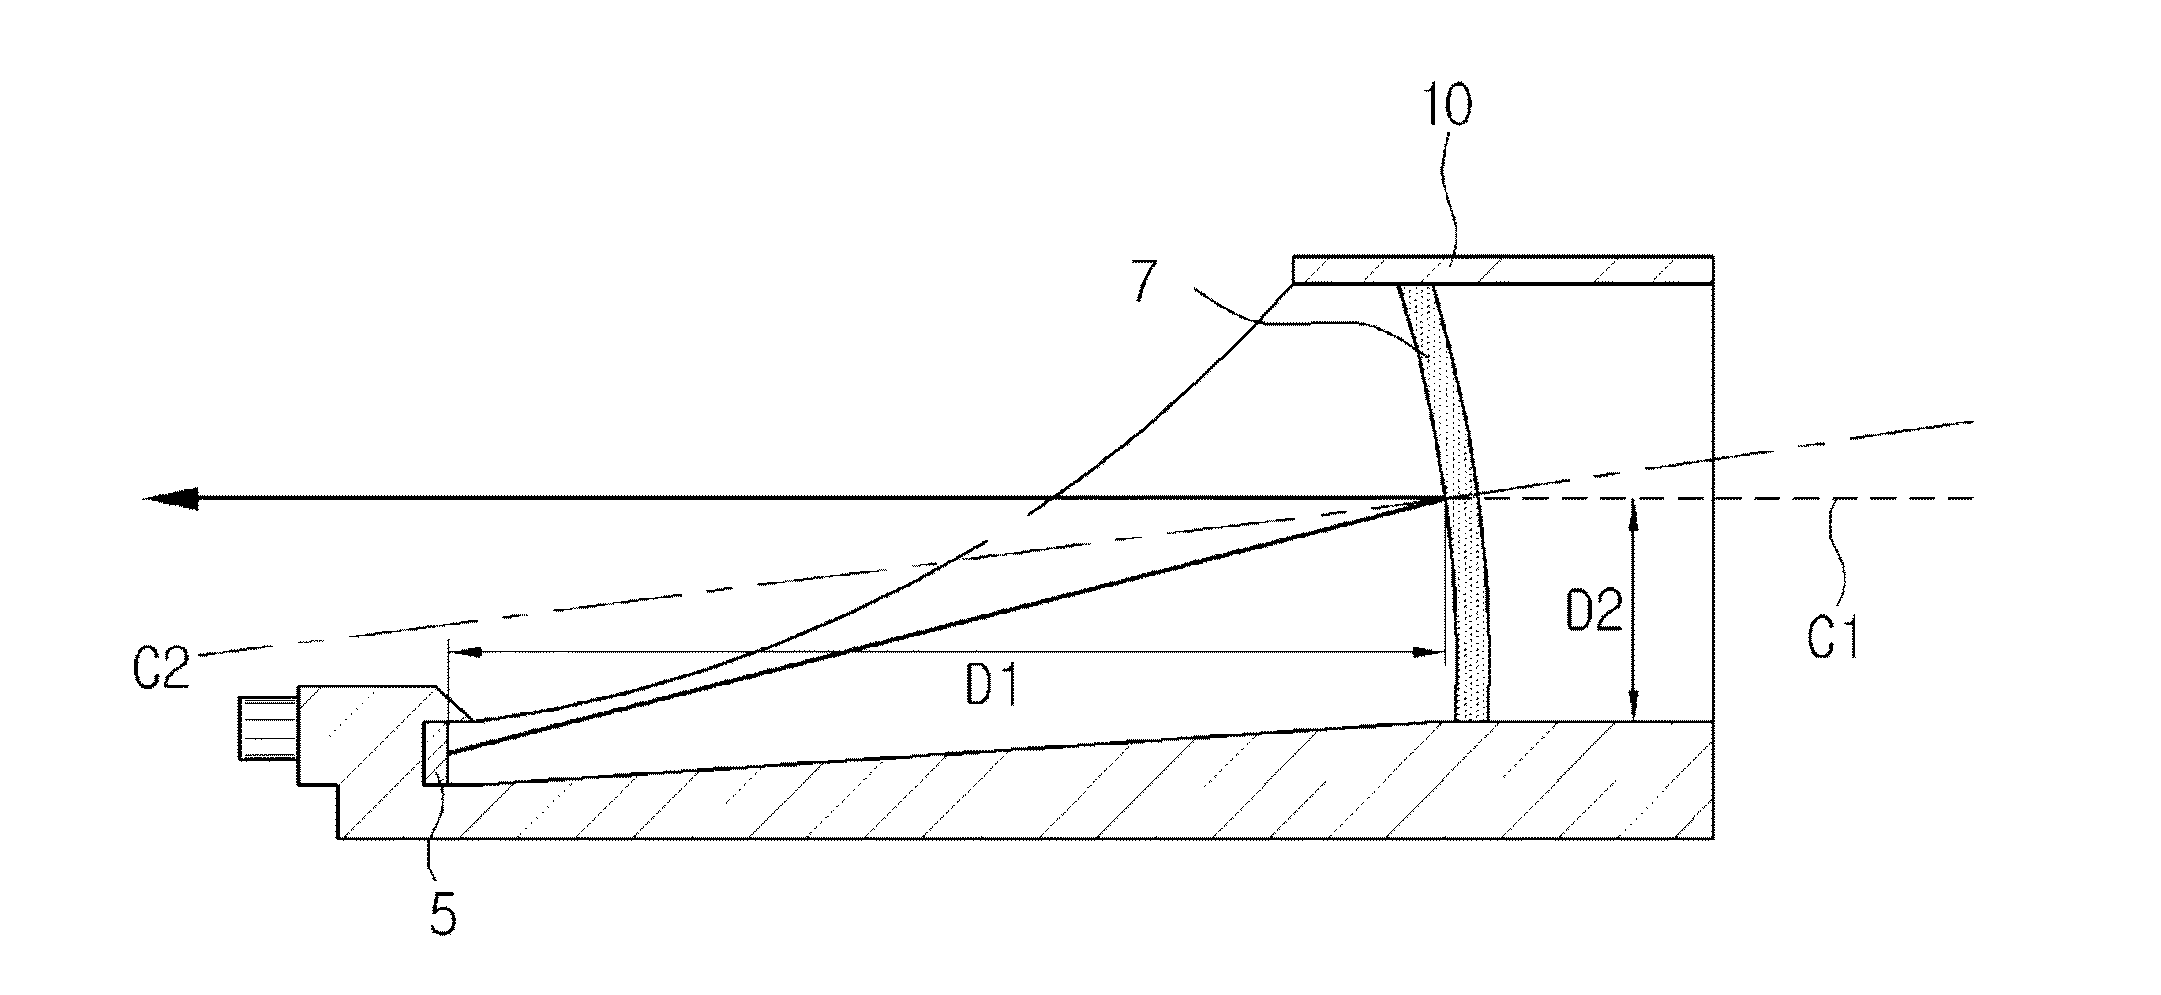 Dot-sight device with polarizers